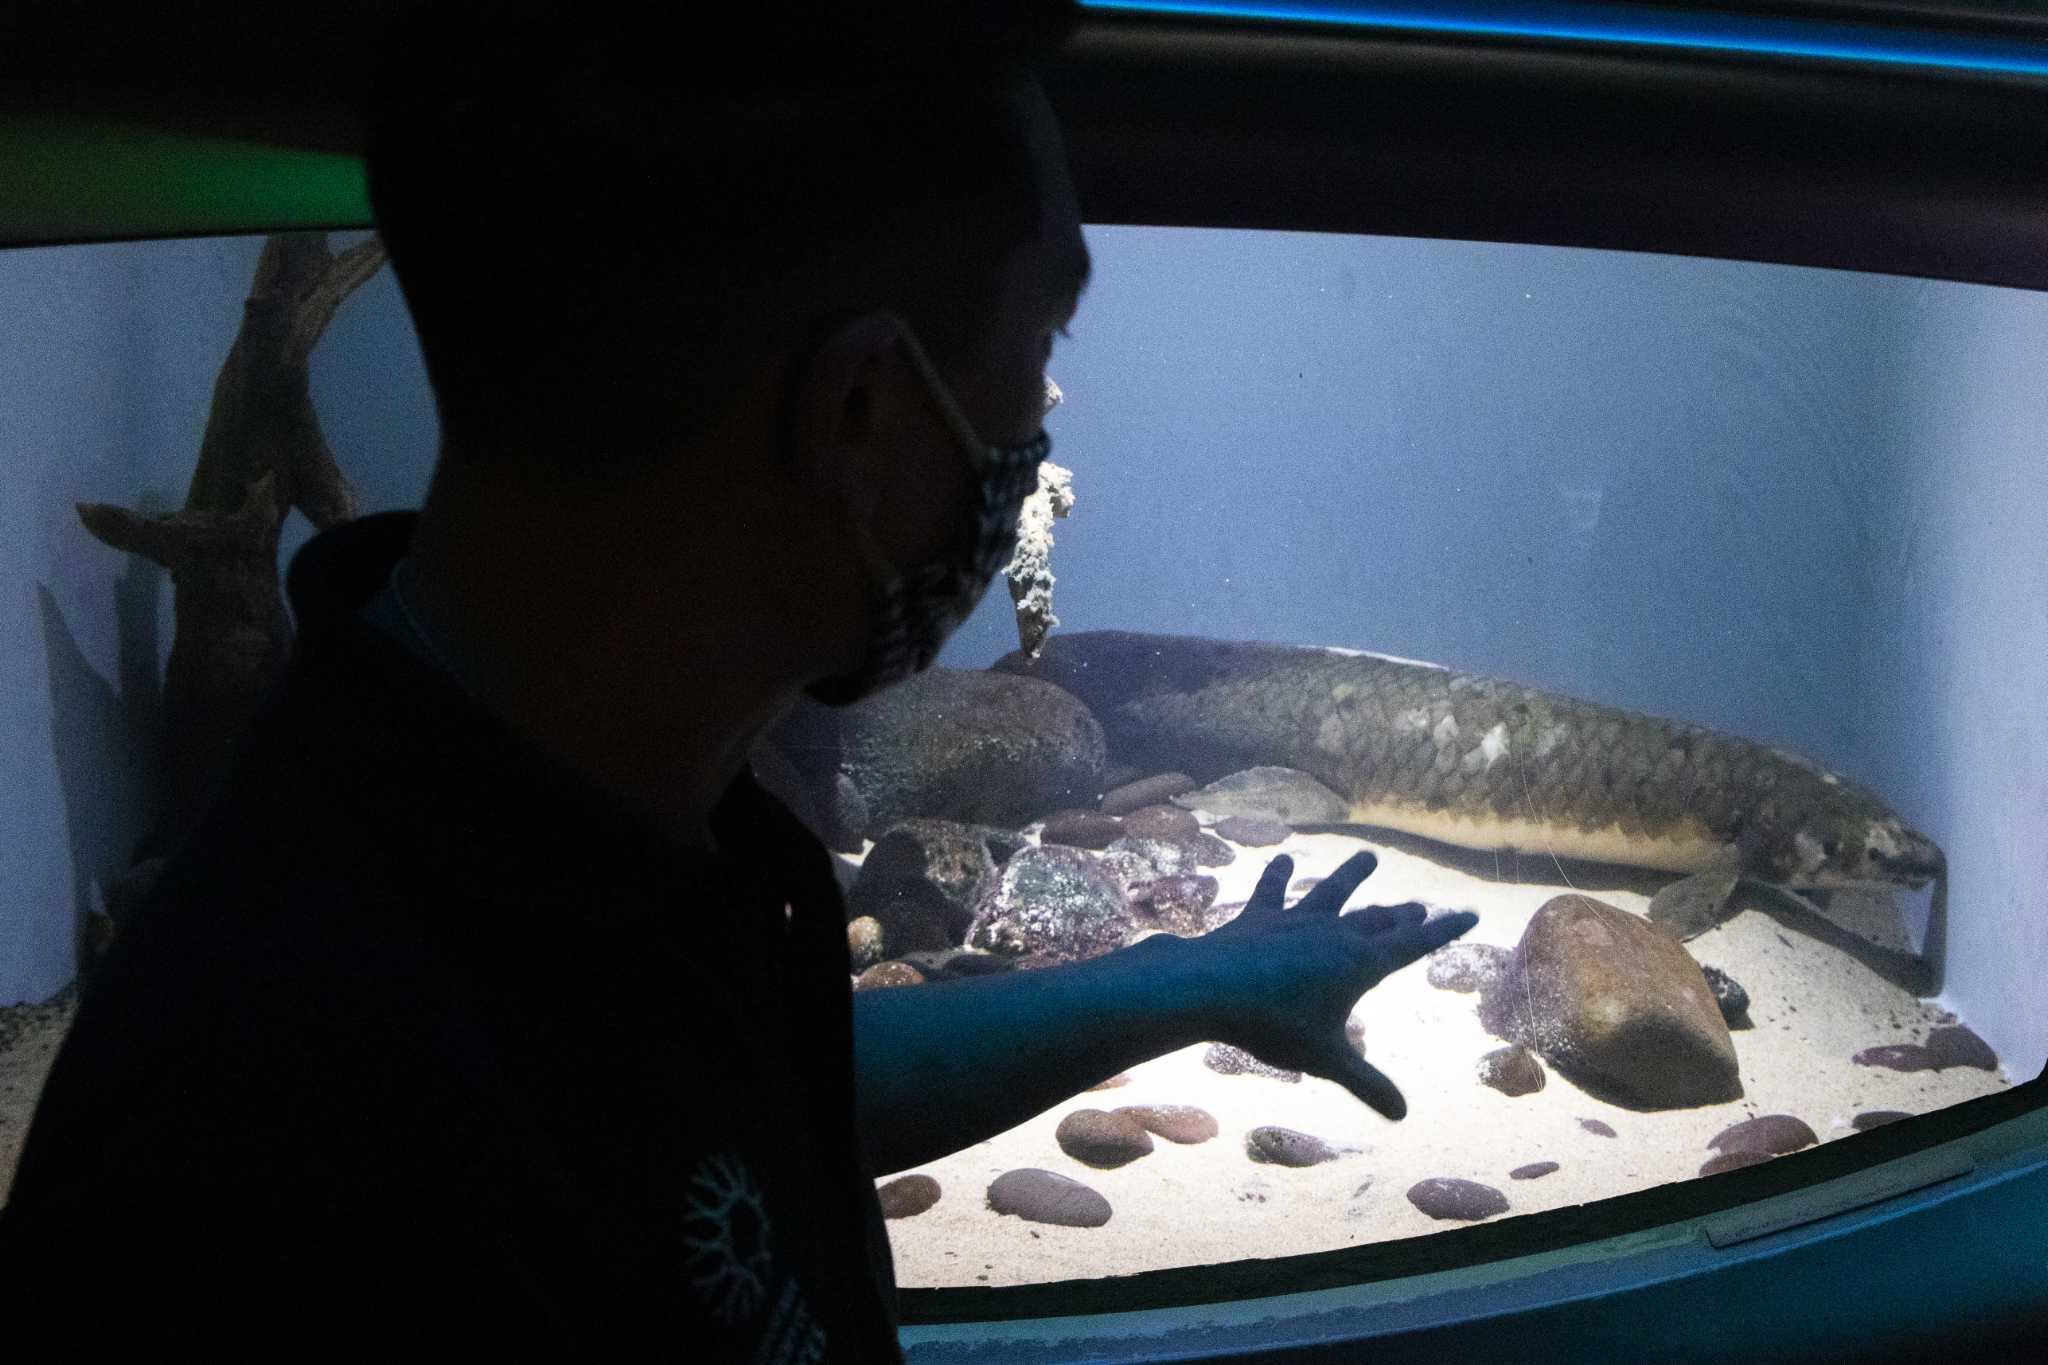 San Francisco has the oldest aquarium fish. Now we know her age